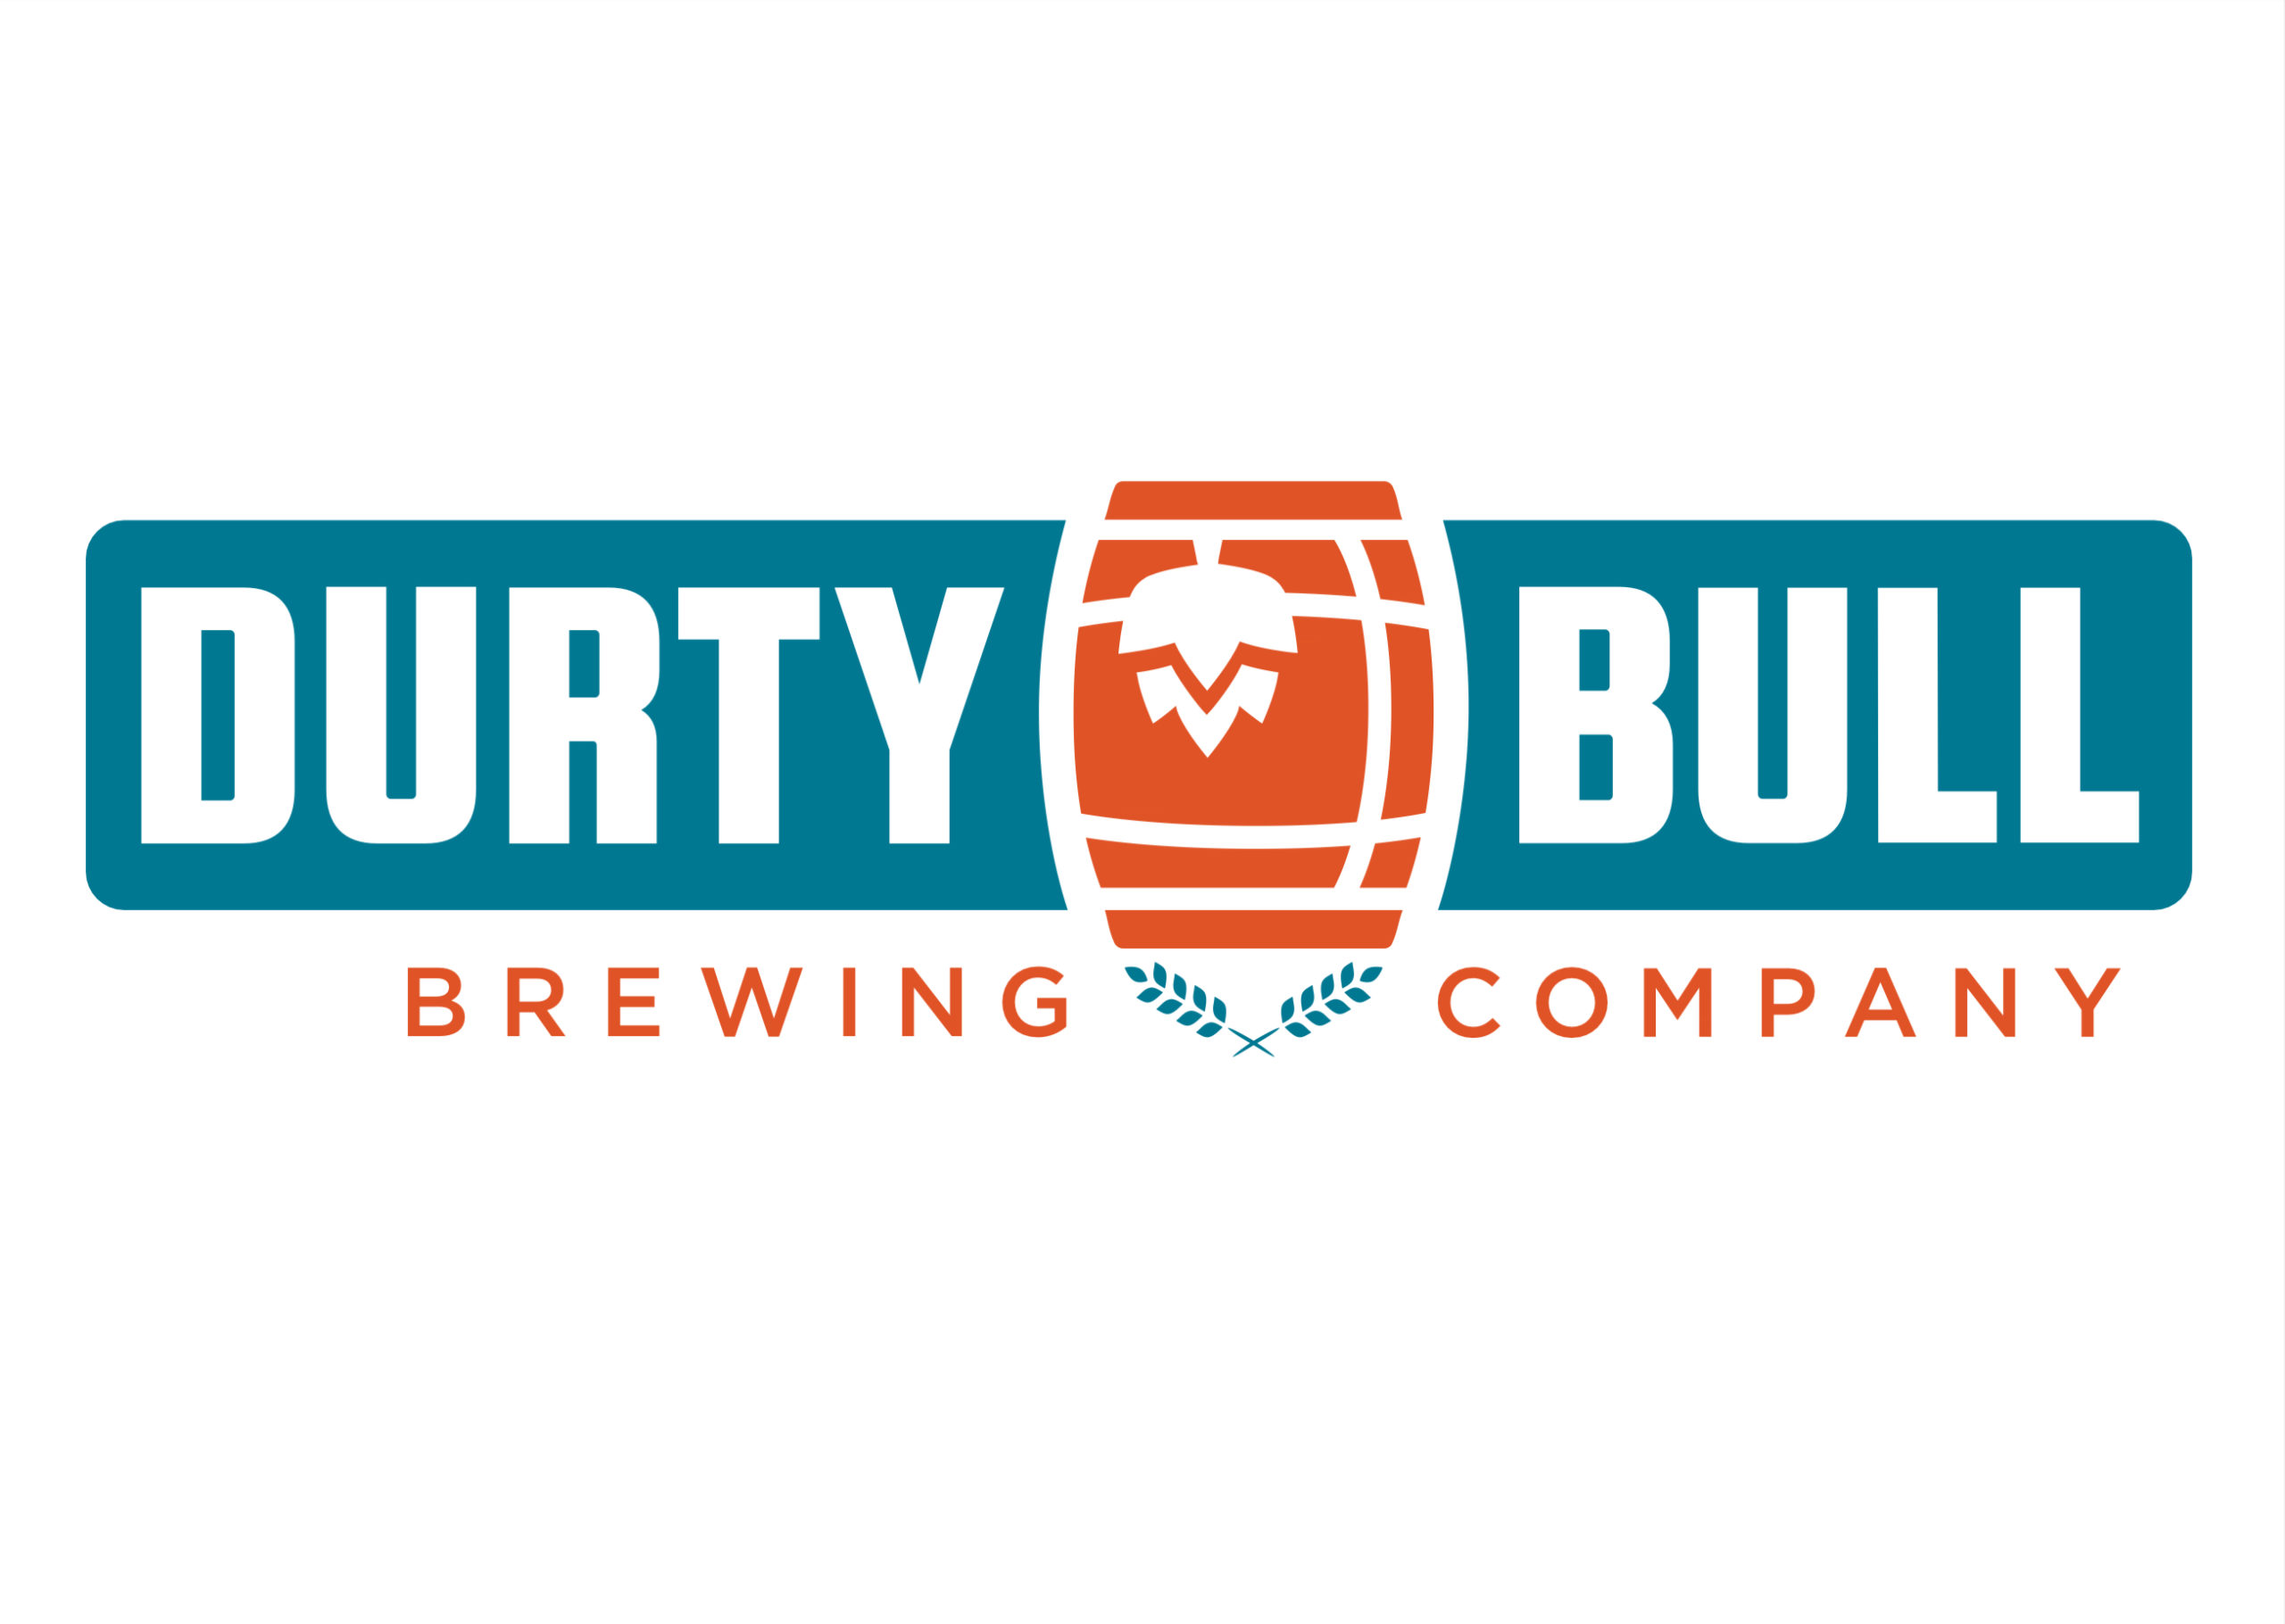 Durty Bull Brewing Company